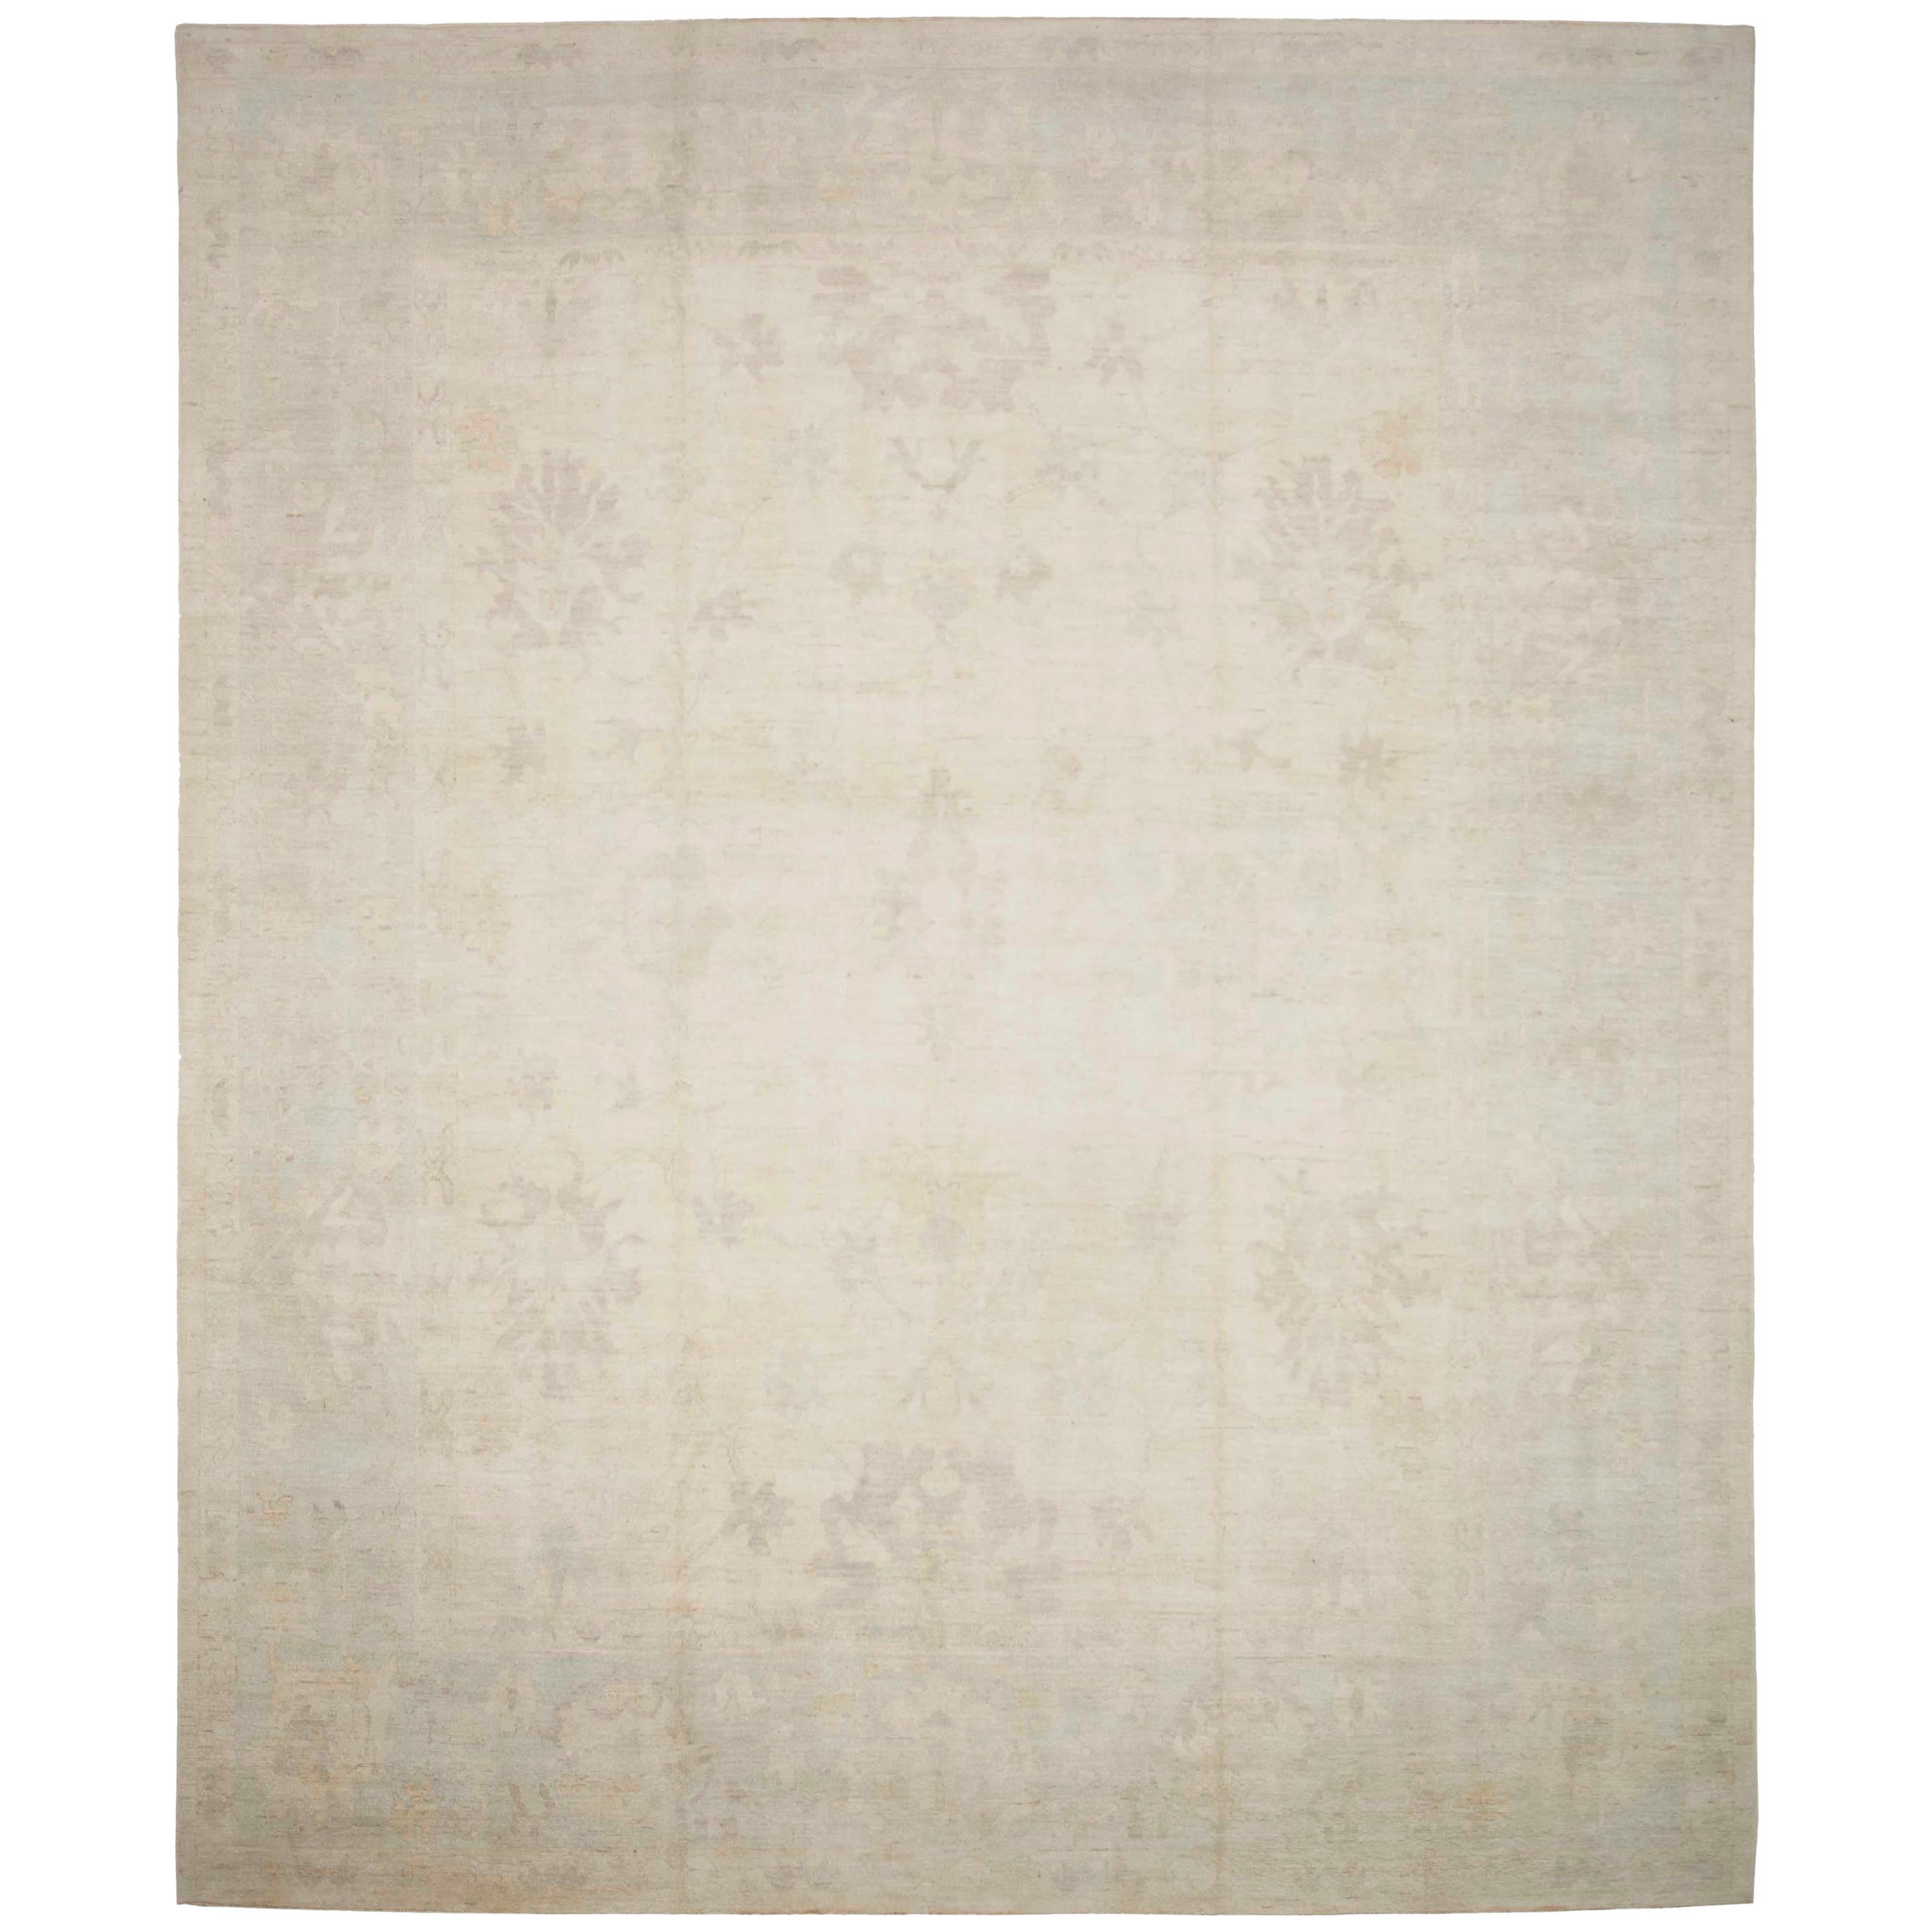 New Turkish area rug handwoven from the finest sheep’s wool. It’s colored with all-natural vegetable dyes that are safe for humans and pets. It’s a traditional Oushak design handwoven by expert artisans. It’s a lovely area rug that can be